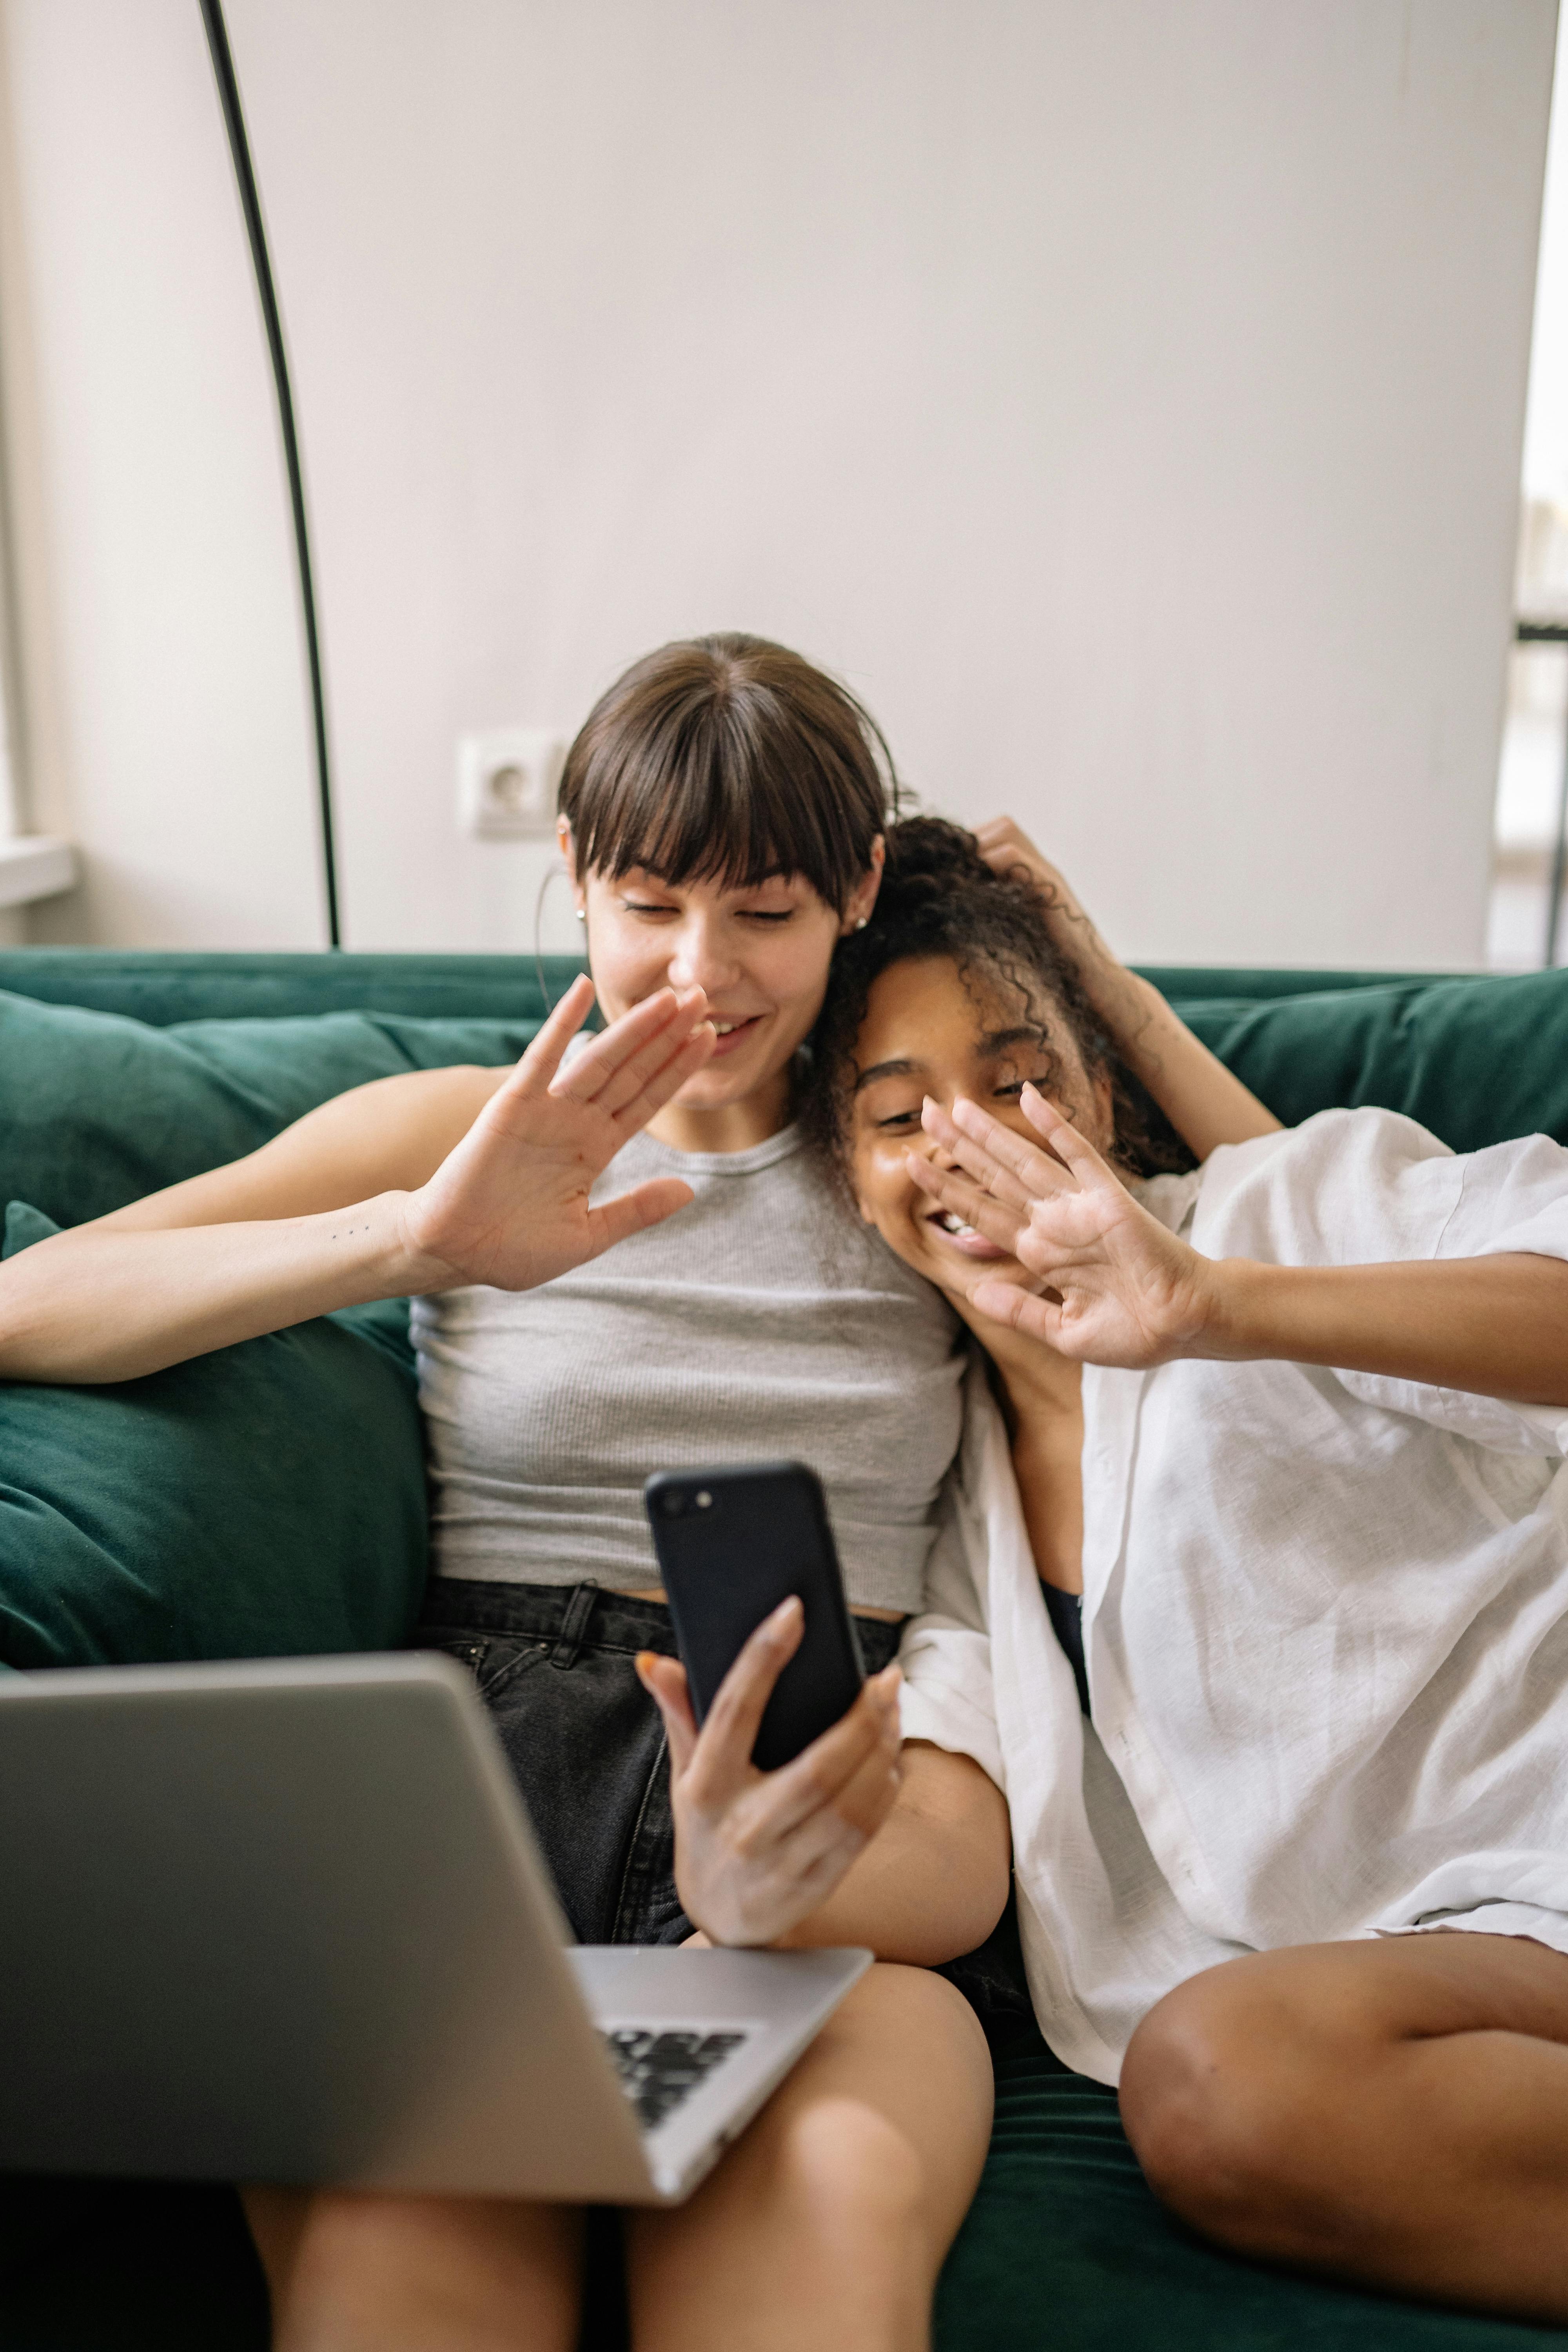 Women Sitting on the Couch Engaged in a picture